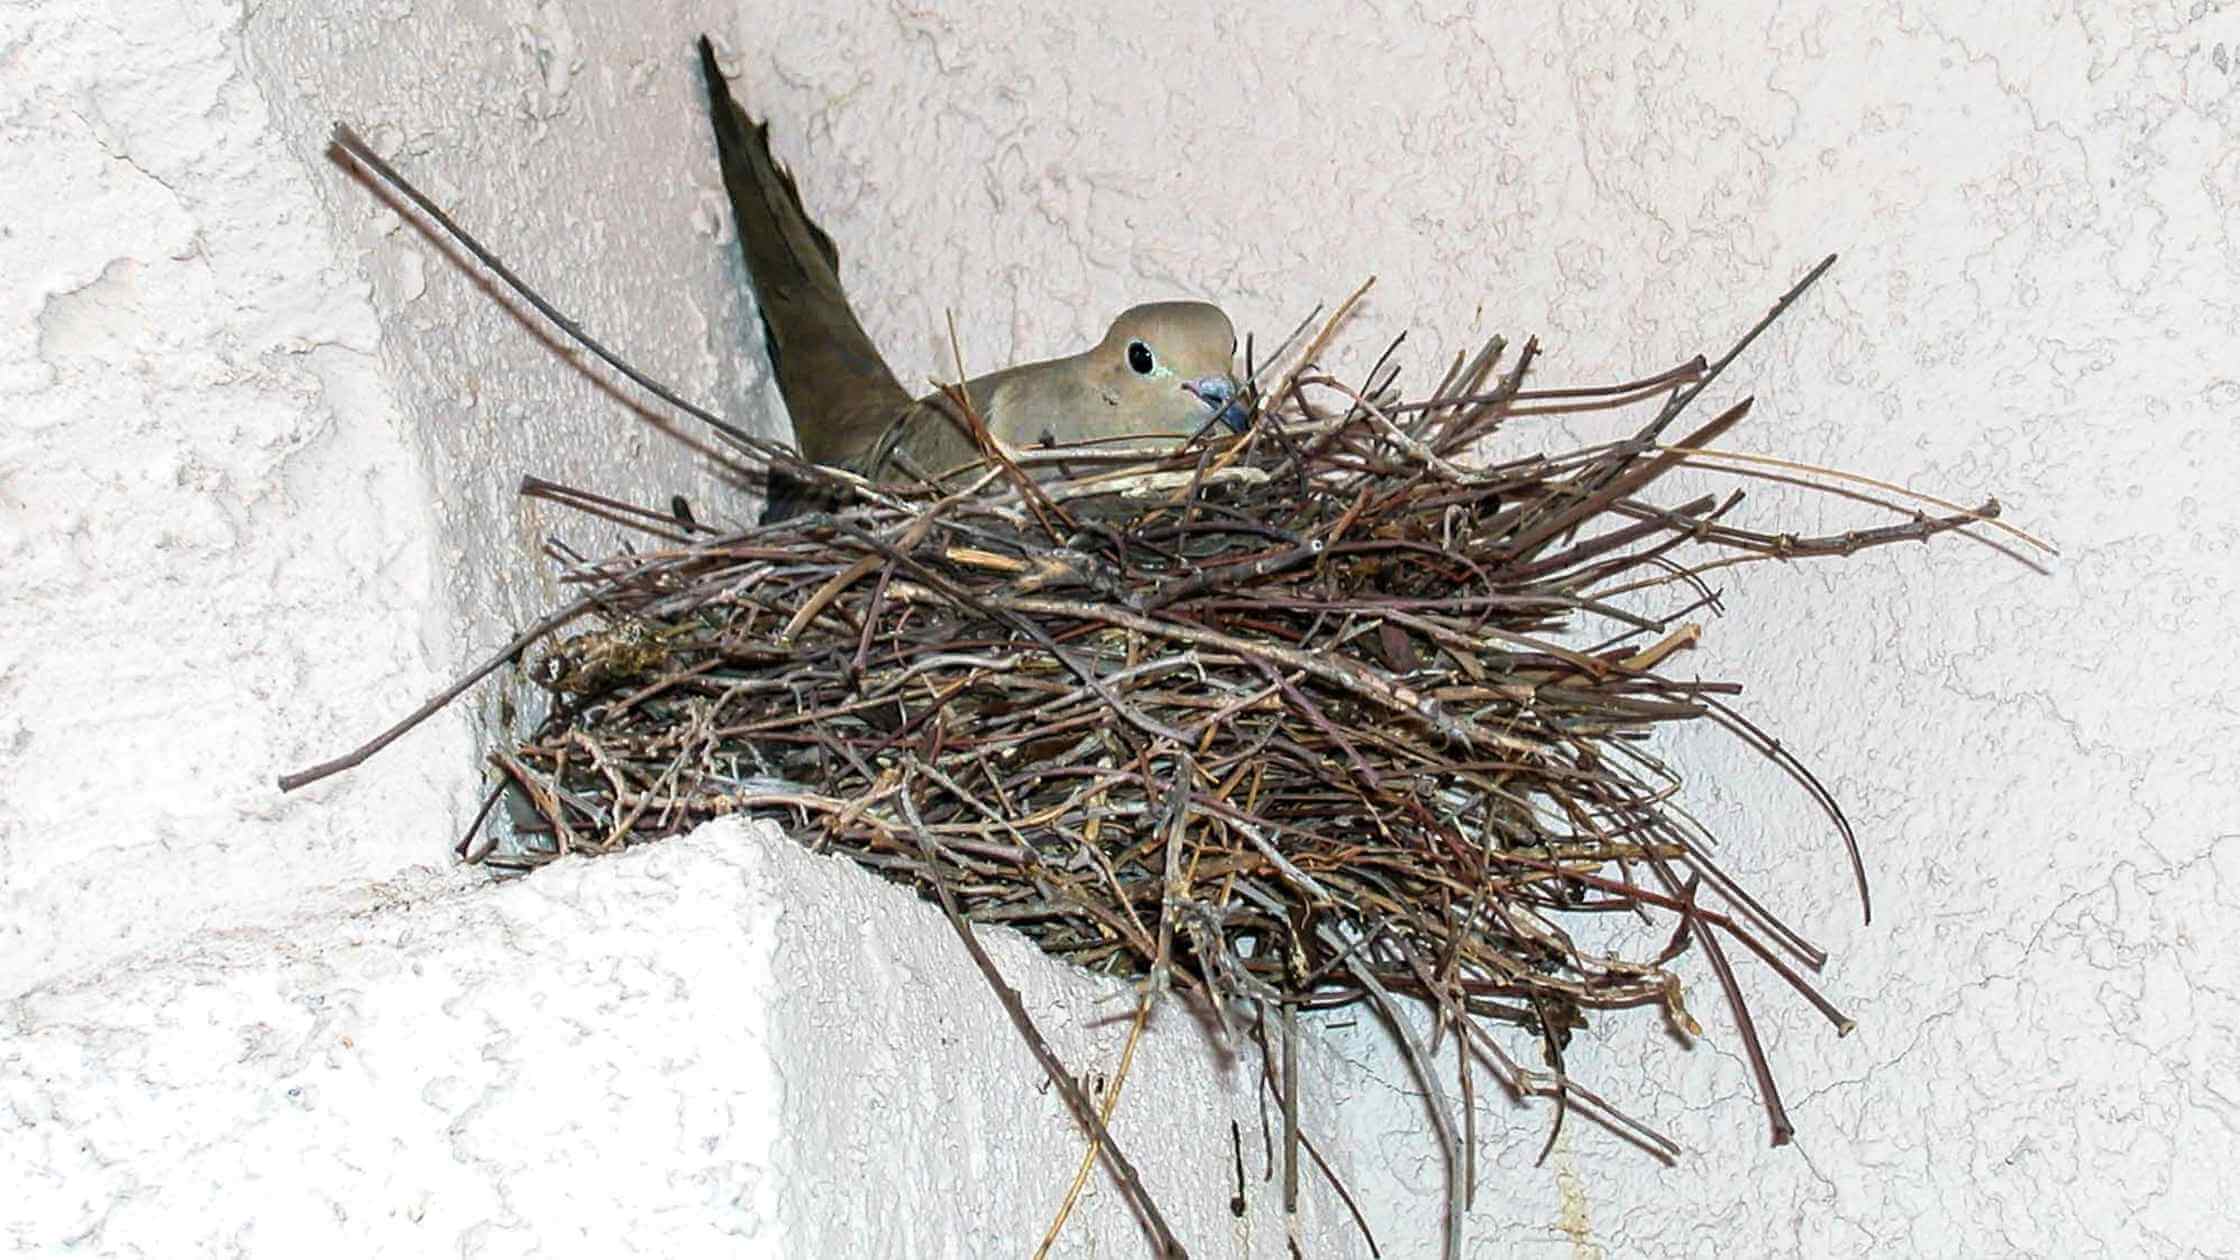 How to stop birds from nesting on your porch?